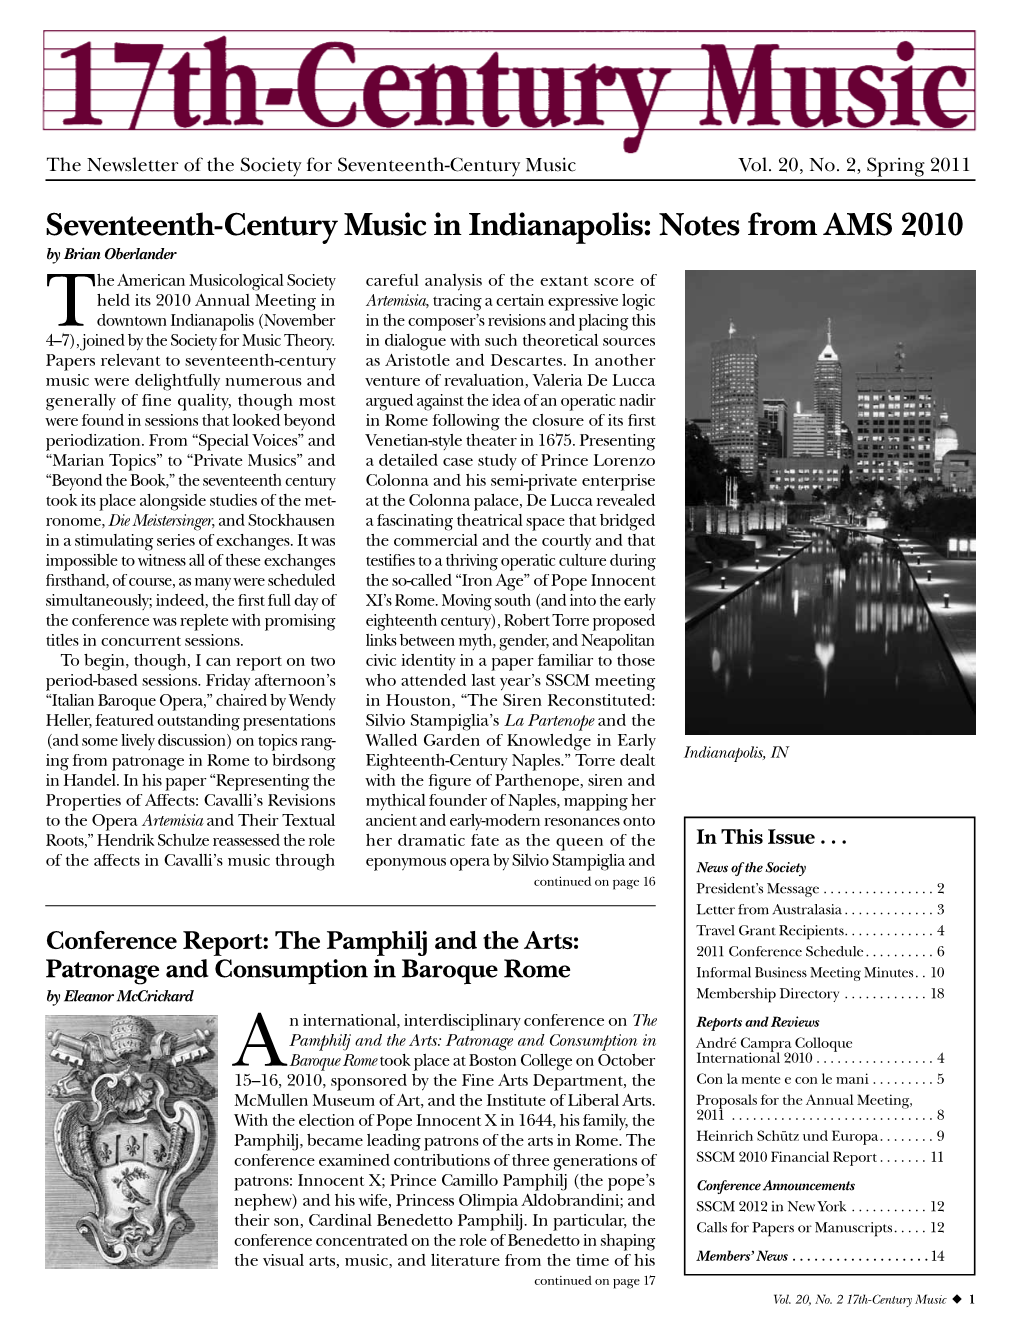 Seventeenth-Century Music in Indianapolis: Notes from AMS 2010